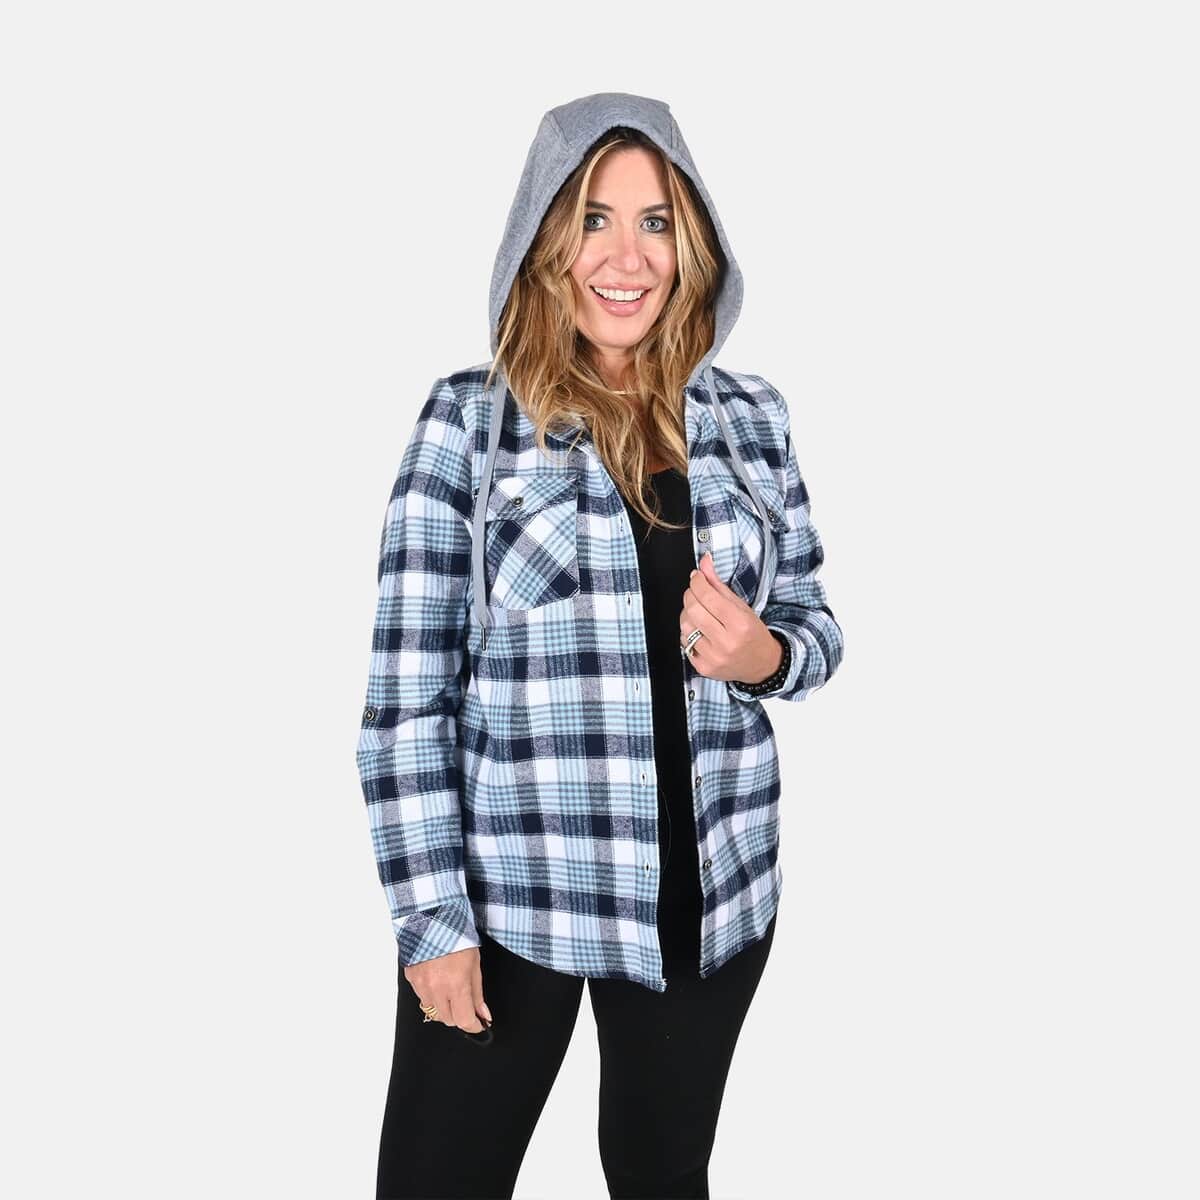 Victory Sportswear Blue and White Plaid Pattern Cotton Shirt with Fleece Hood -M image number 3